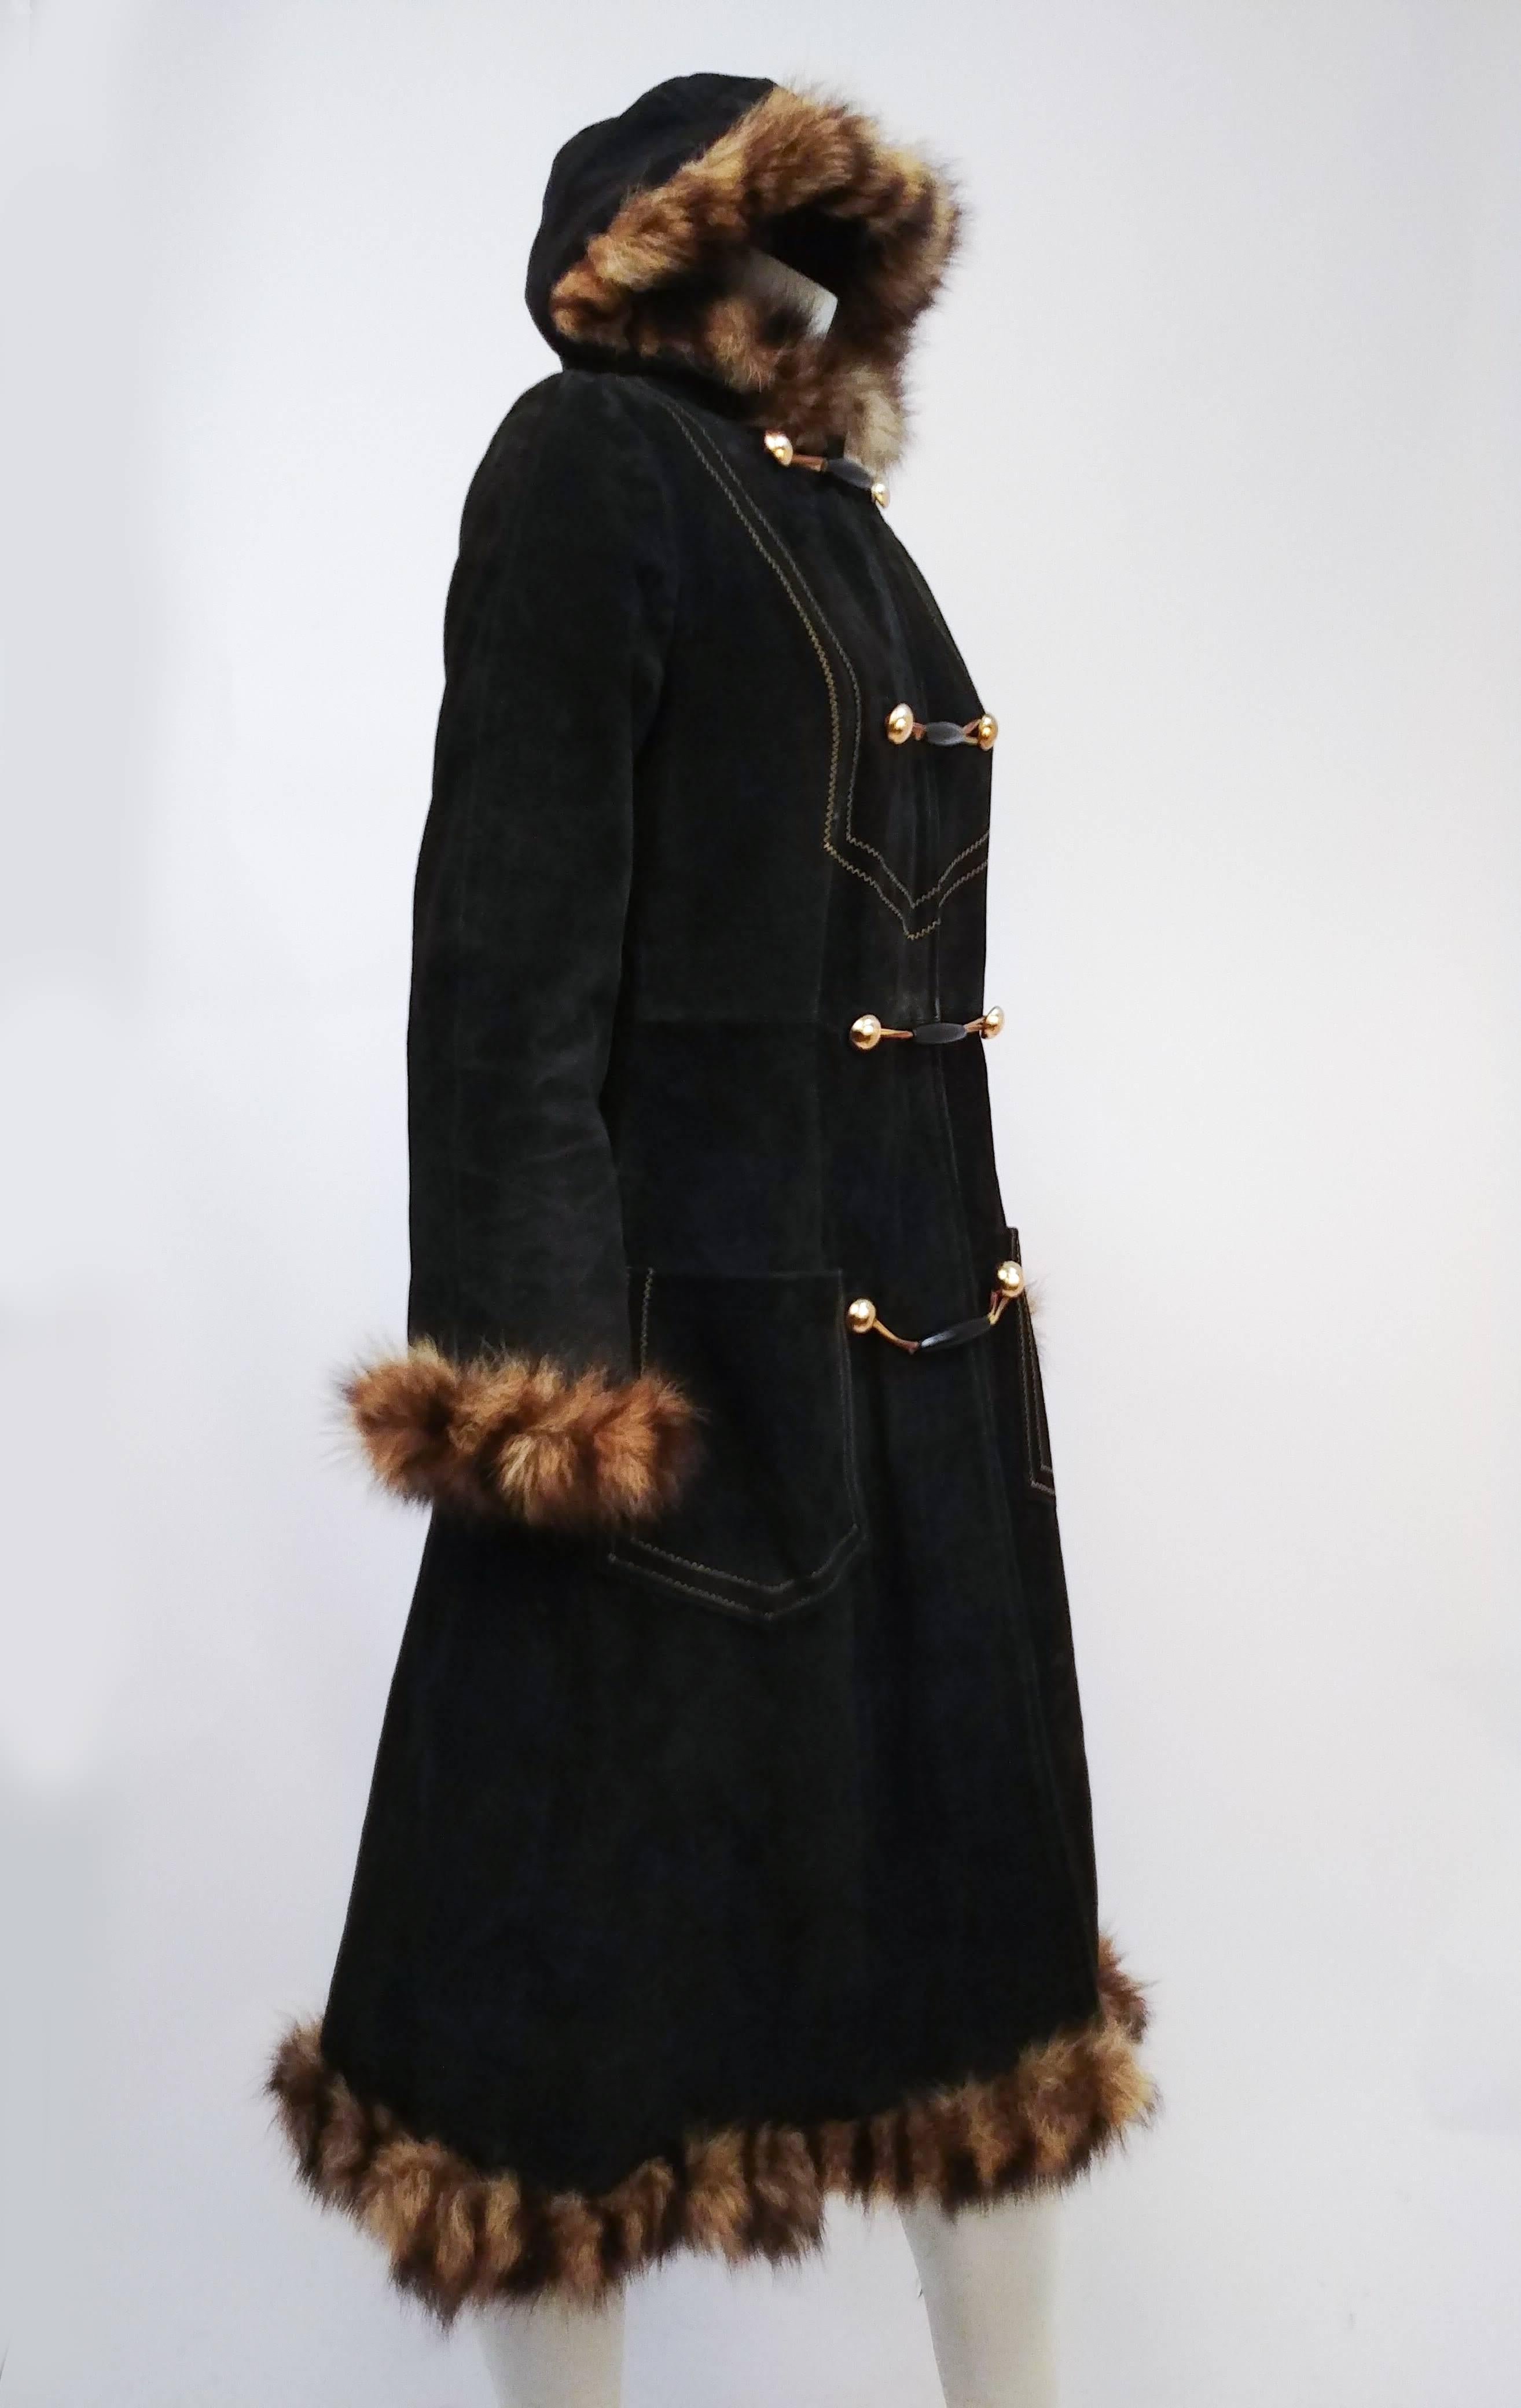 1970s Black Suede Leather Coat w/ Raccoon Trim. Decorative topstitching on coat front. Fur trim on hood, sleeves, and hem. 